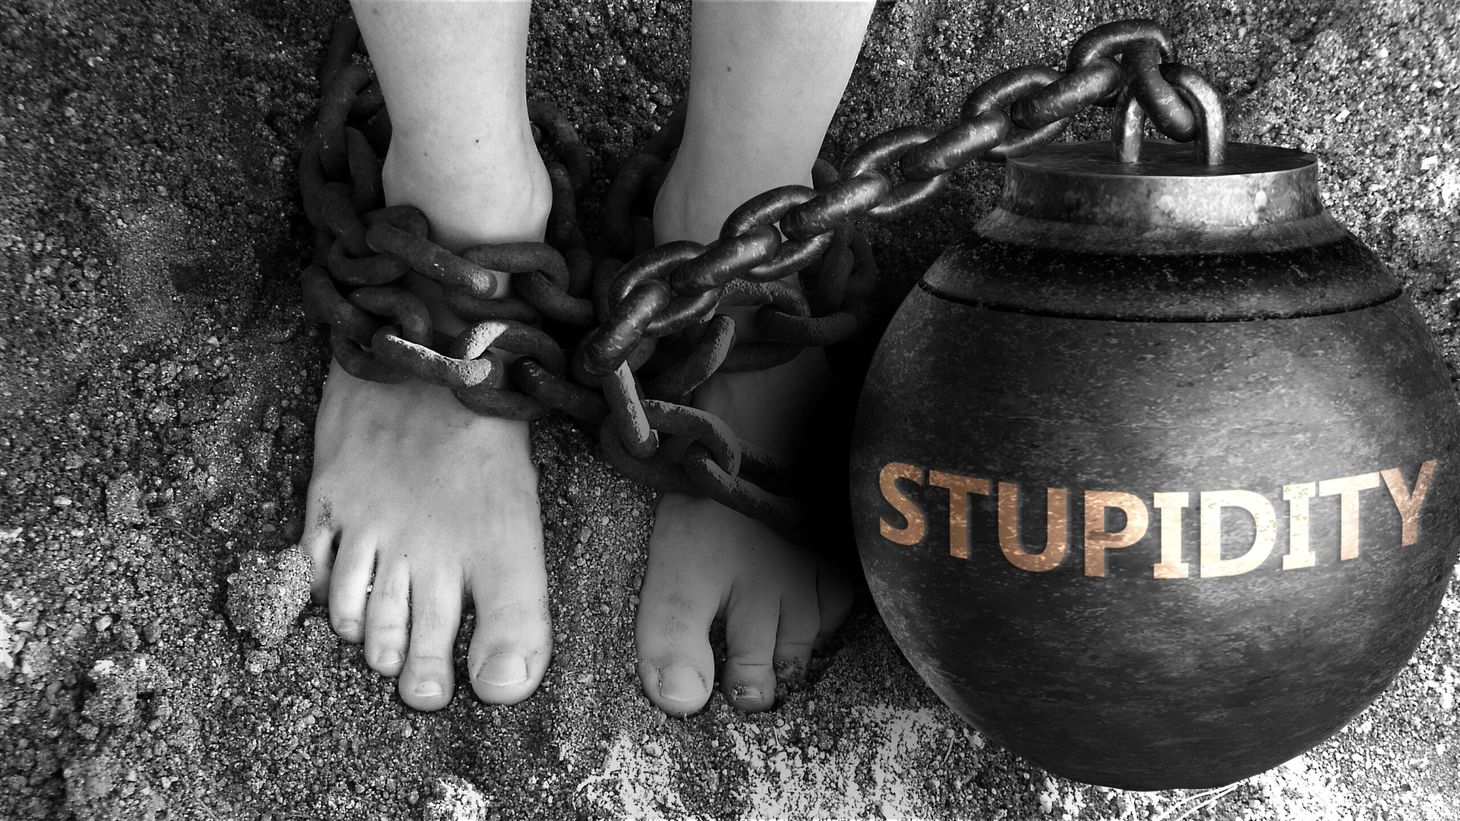 Acting stupidly is like have a ball and chain around us.